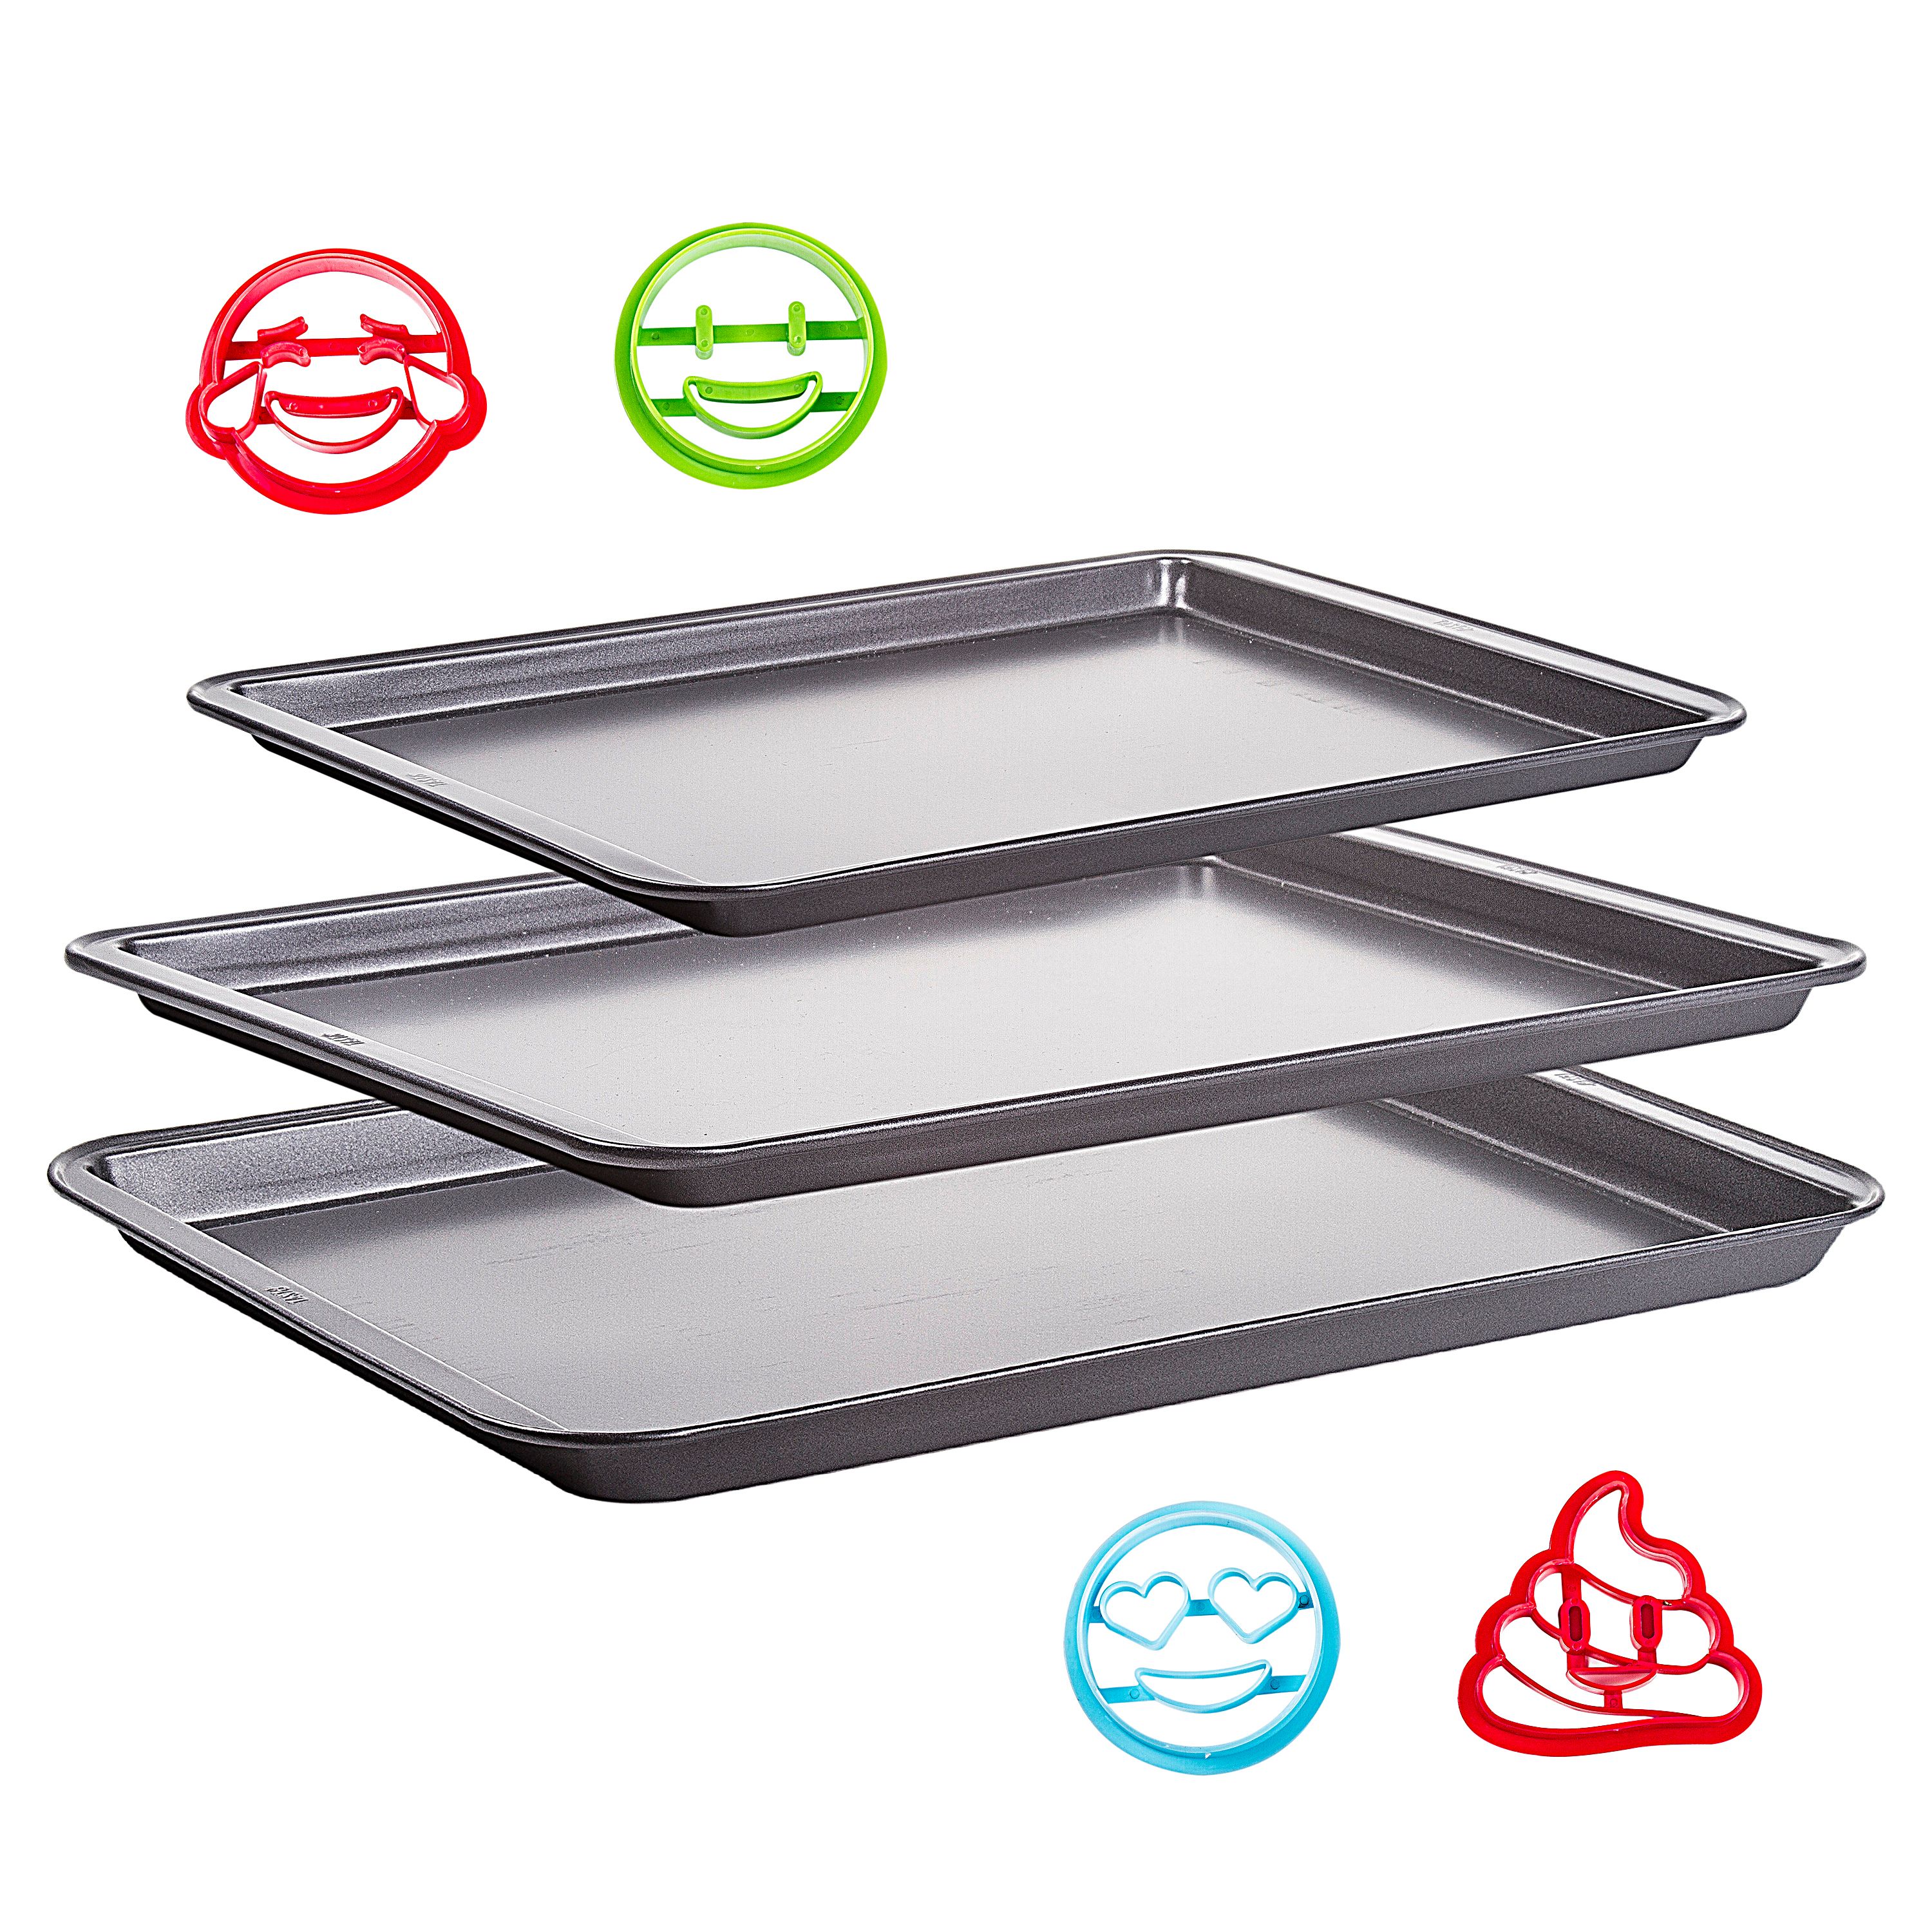 Tasty Cookie Sheet Set with 4 Cookie Cutters - image 3 of 11